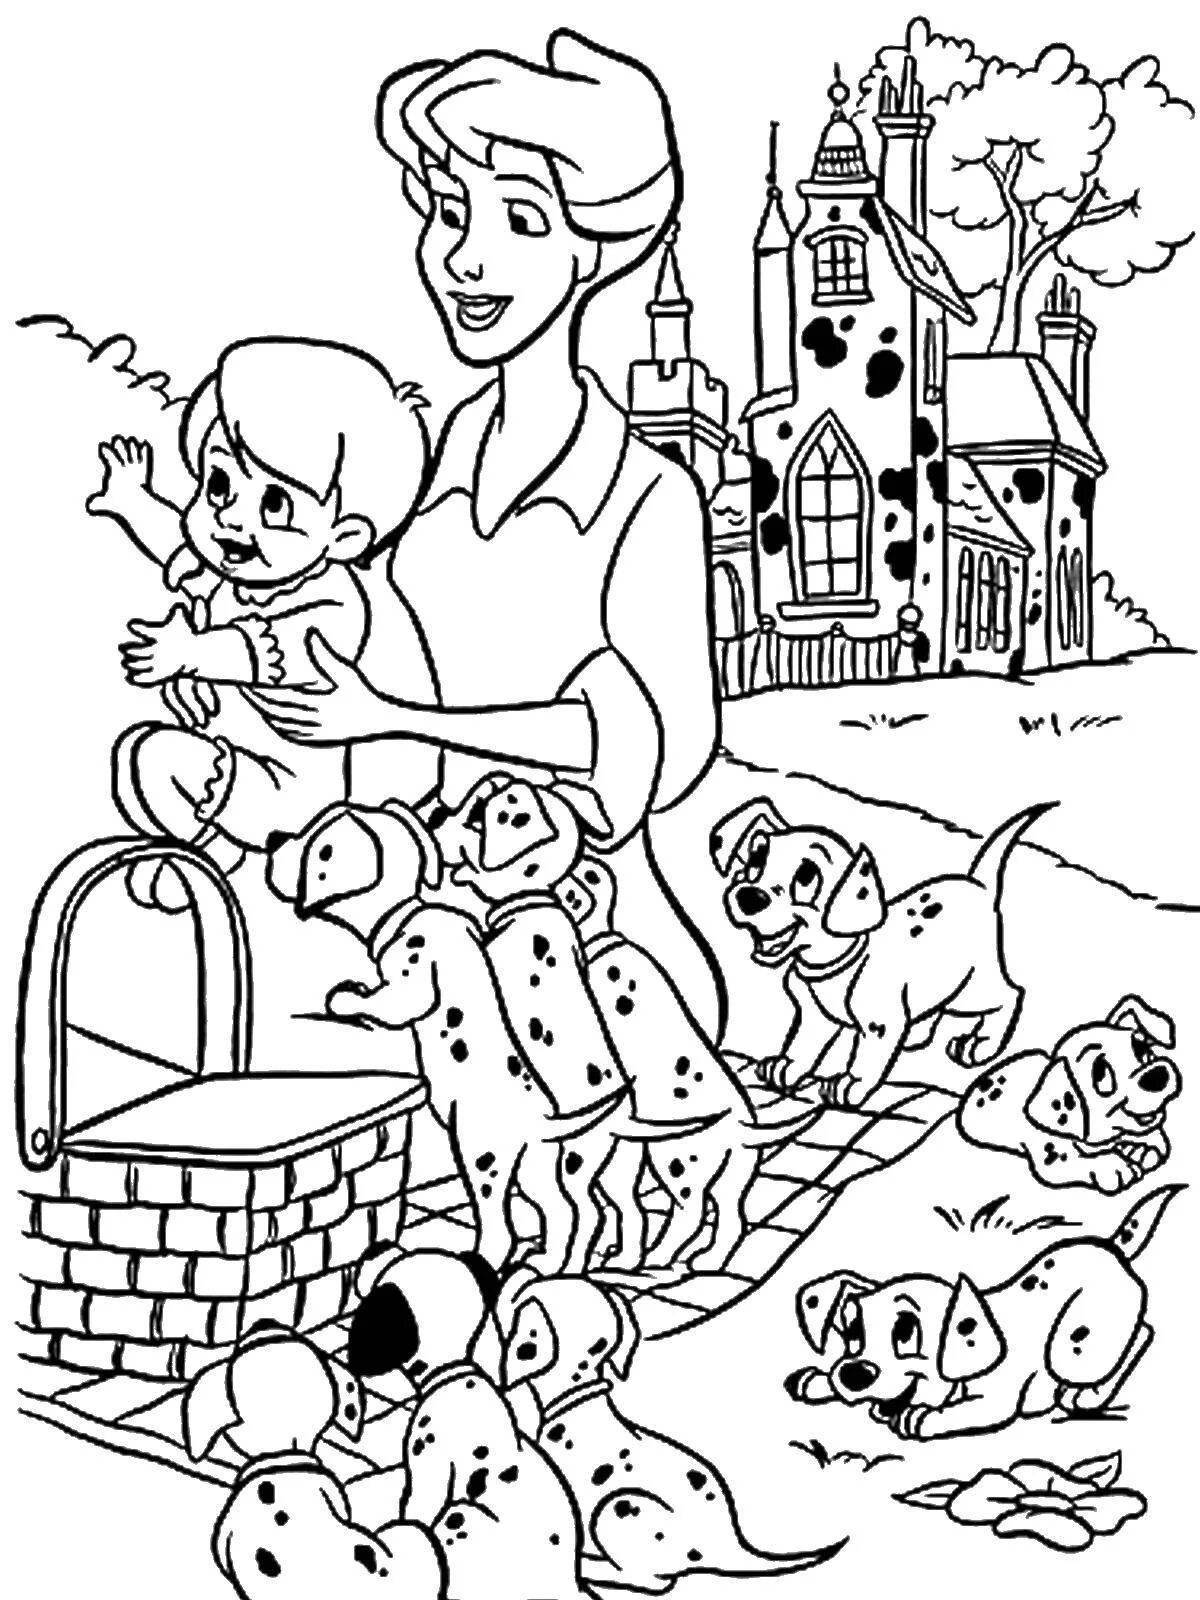 An entertaining coloring story for children